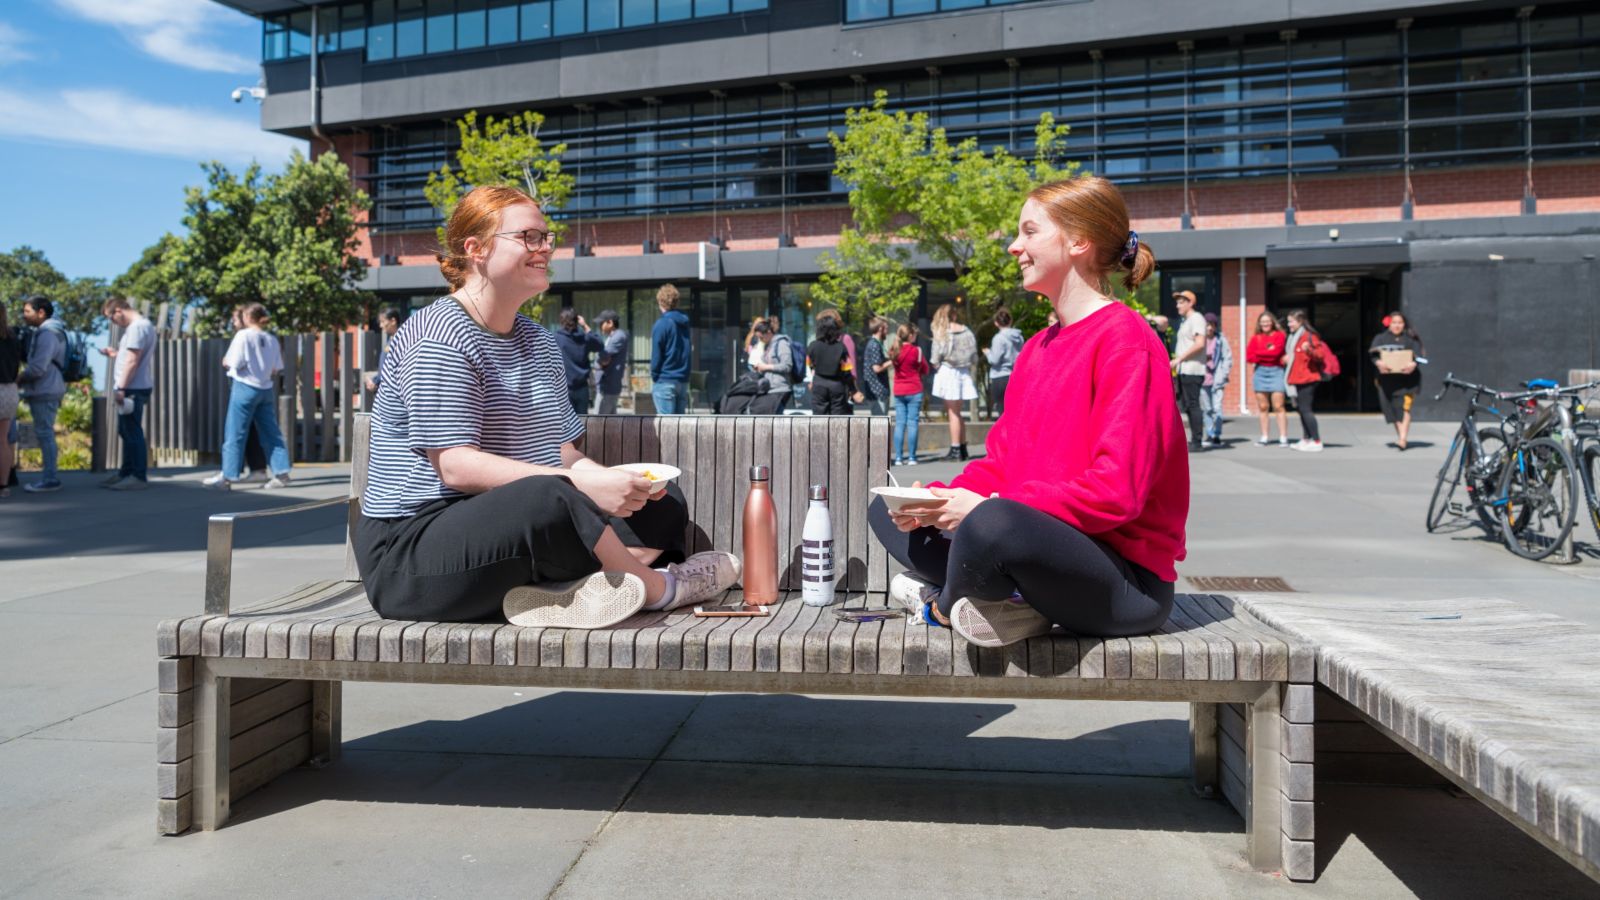 Two students sitting cross-legged on a bench facing each other and talking.